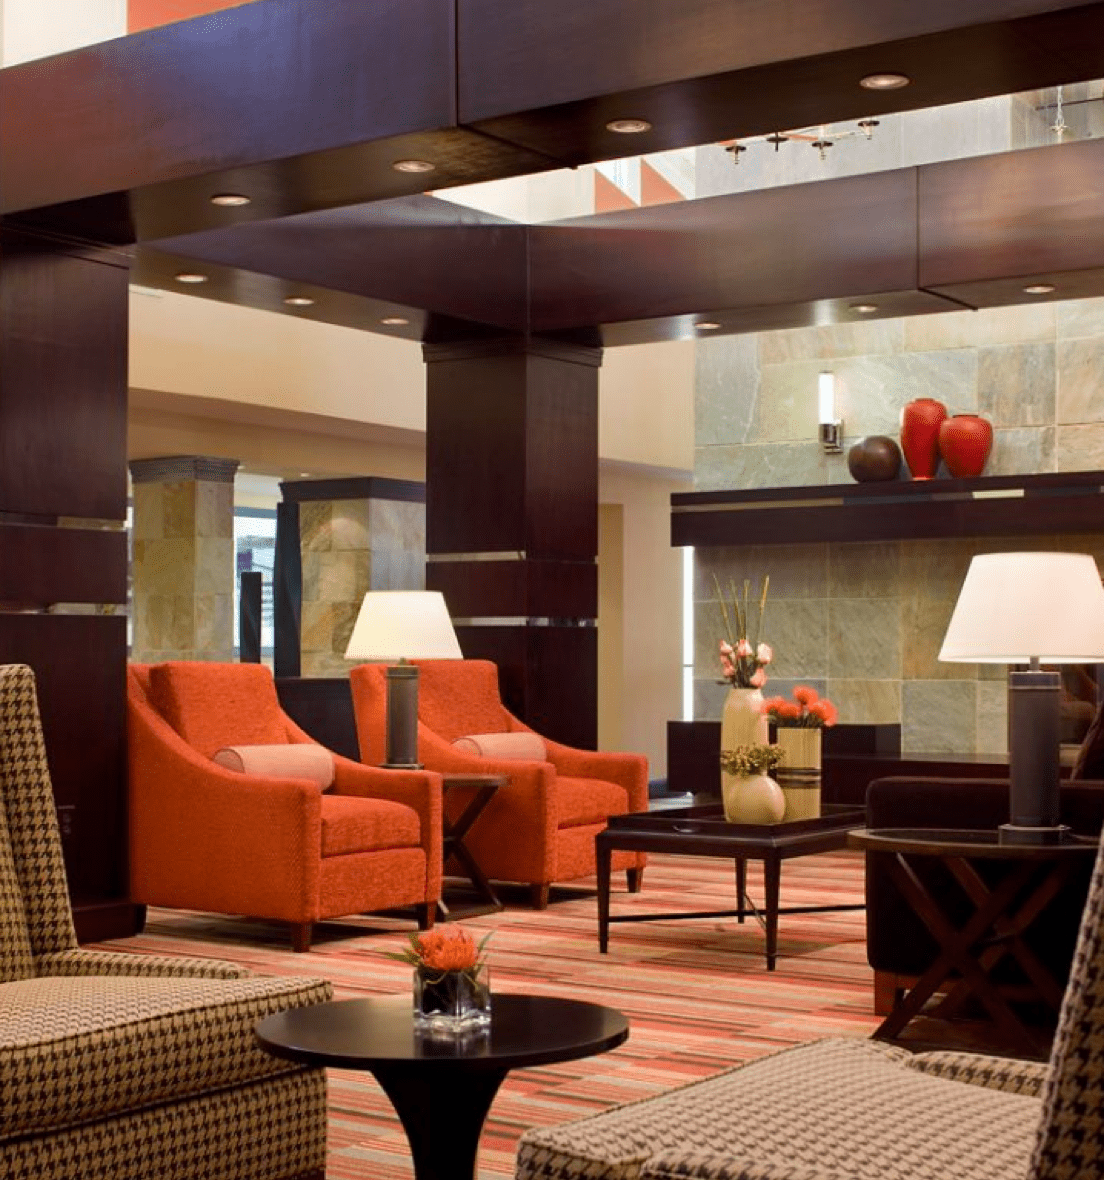 Hotel lobby area with red accent chairs